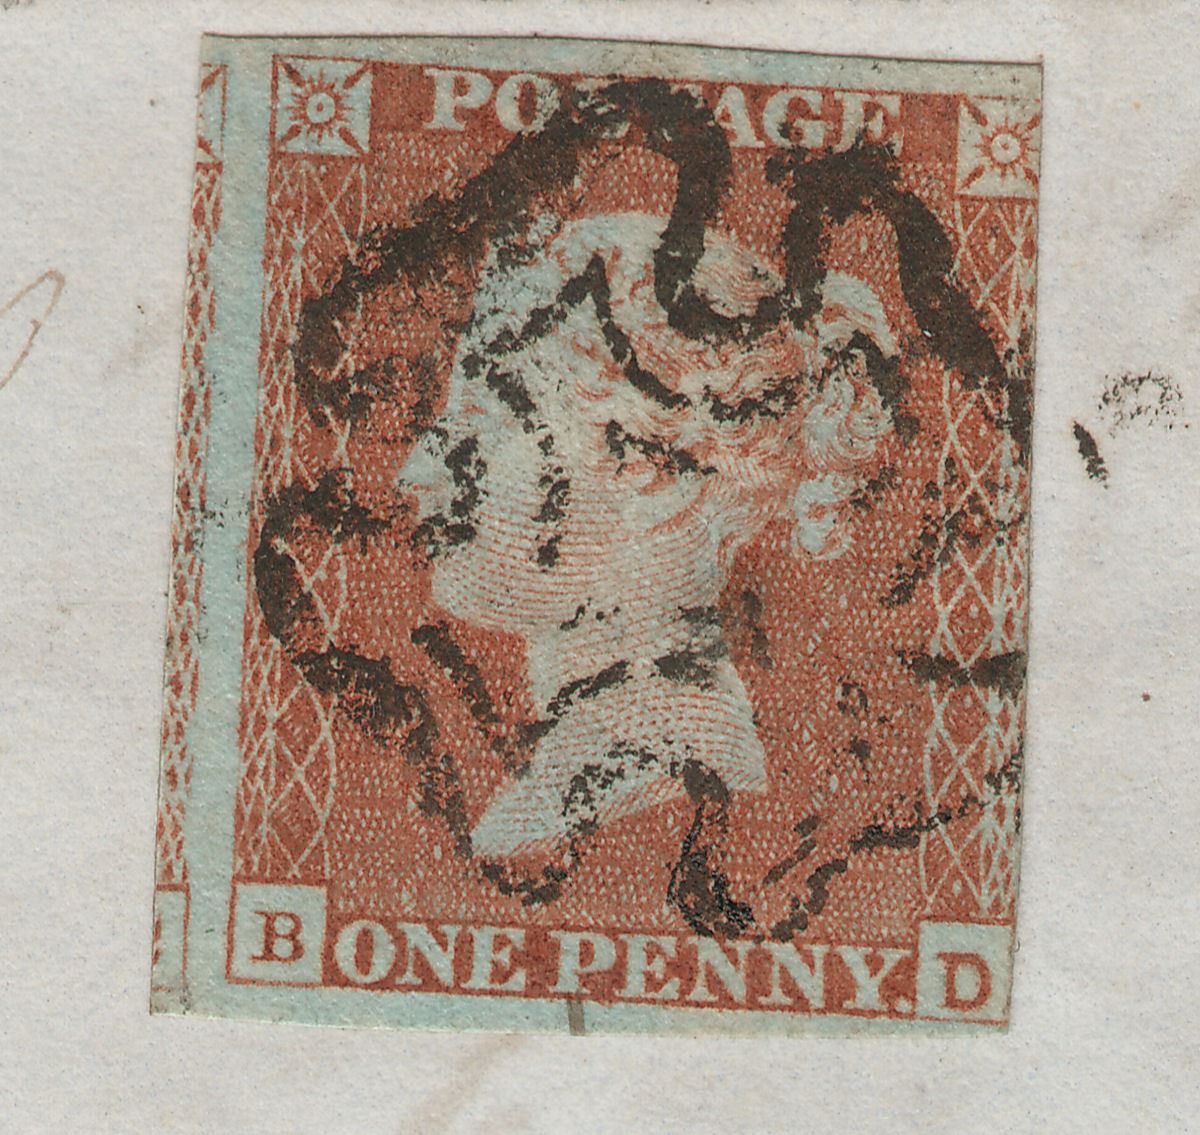 GB 1842 QV 1d Red-Brown Imperf Used on Cover Glasgow - Stowbridge noted plate 22